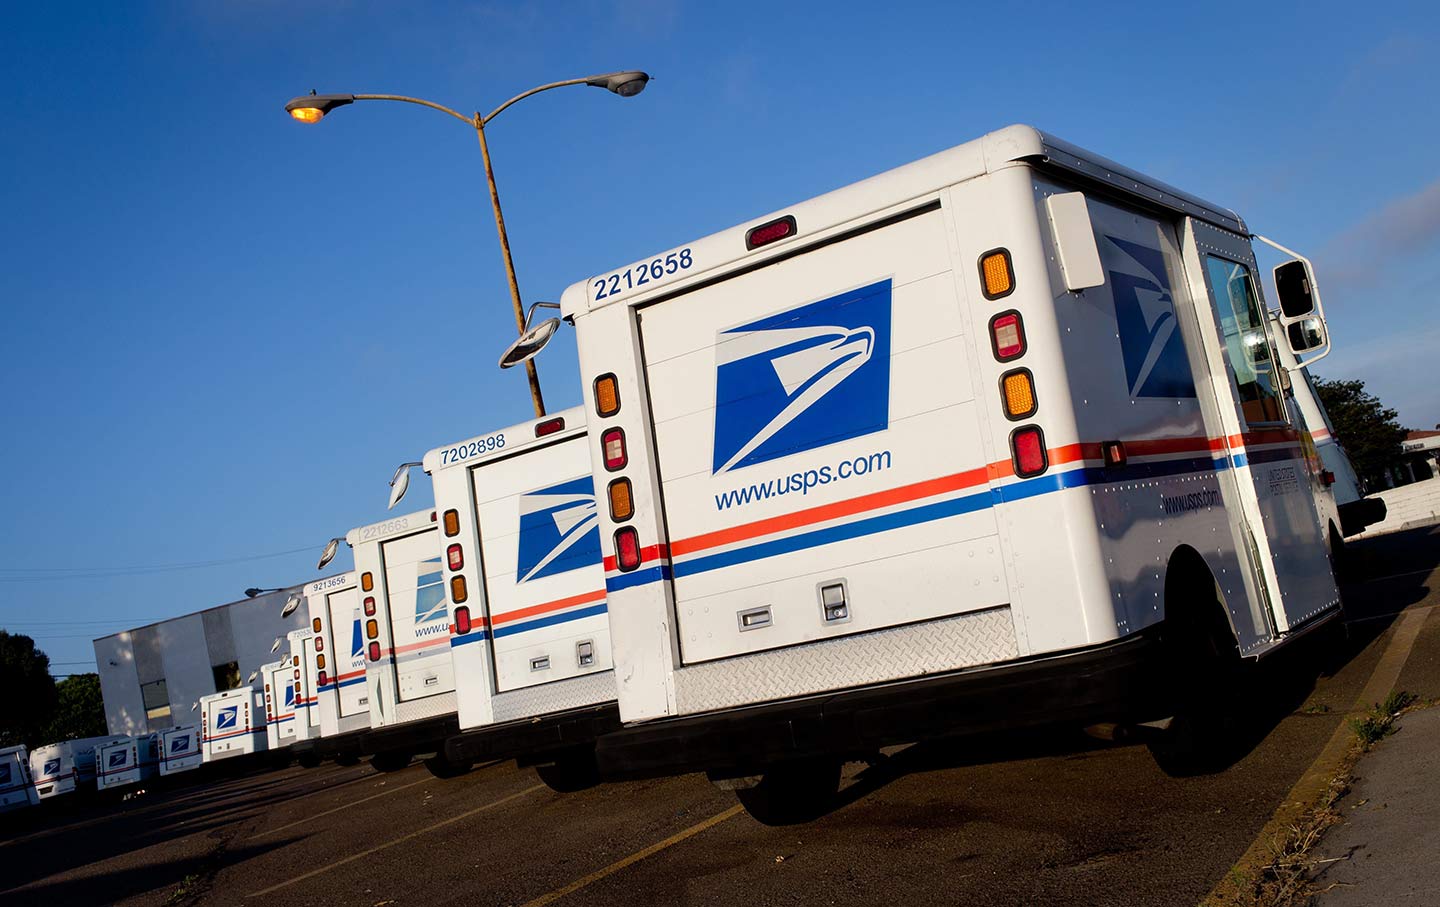 Senator Ron Johnson Thinks the Outcry Over the Post Office Is a Left-Wing Conspiracy